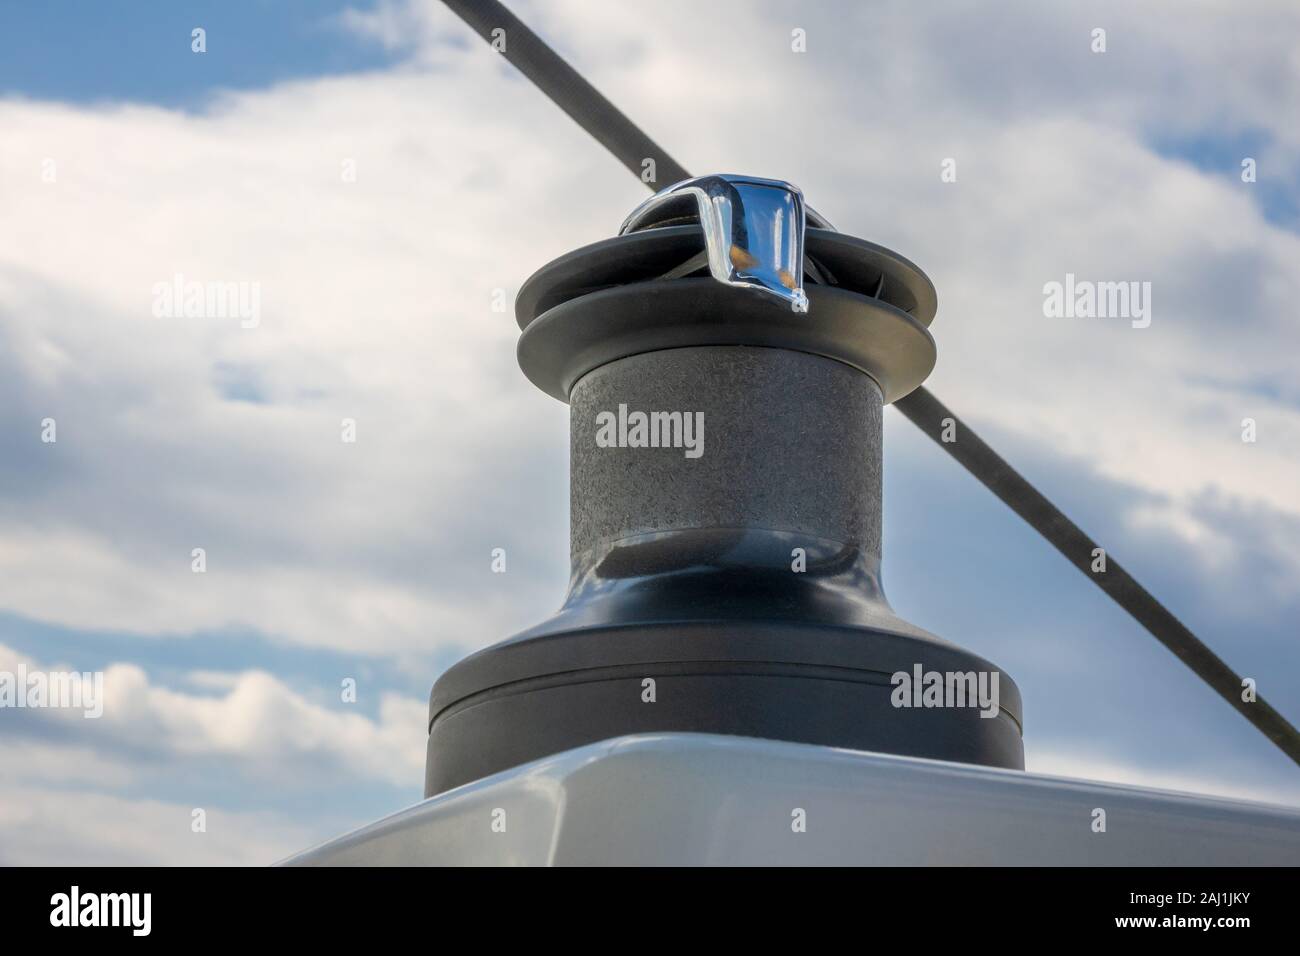 Yacht winch close-up on a background of blurry blue sky with clouds Stock Photo